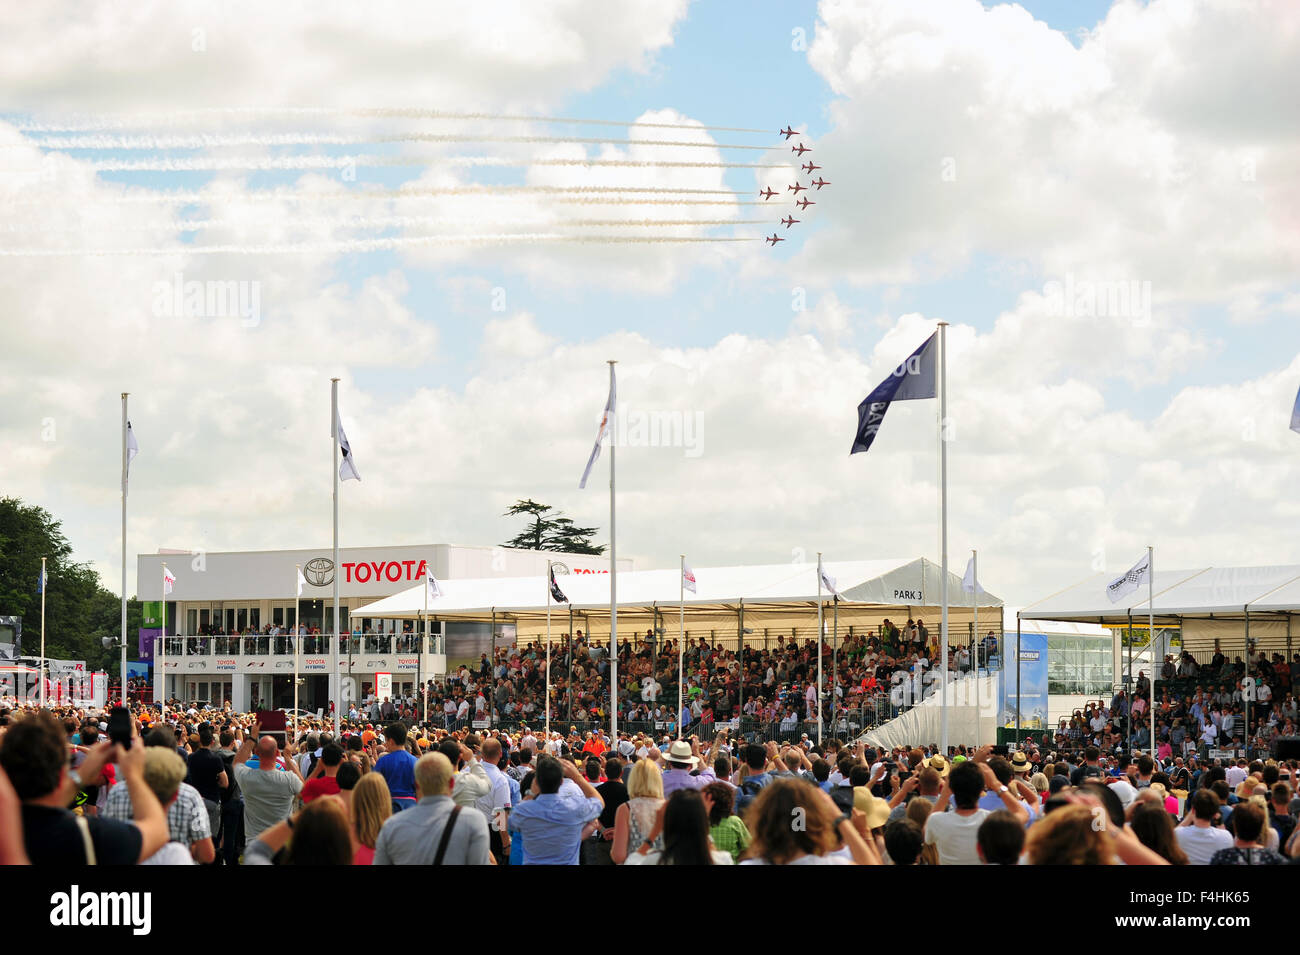 The RAF Red Arrows display team perform above the crowds at the Goodwood Festival of Speed in the UK. Stock Photo